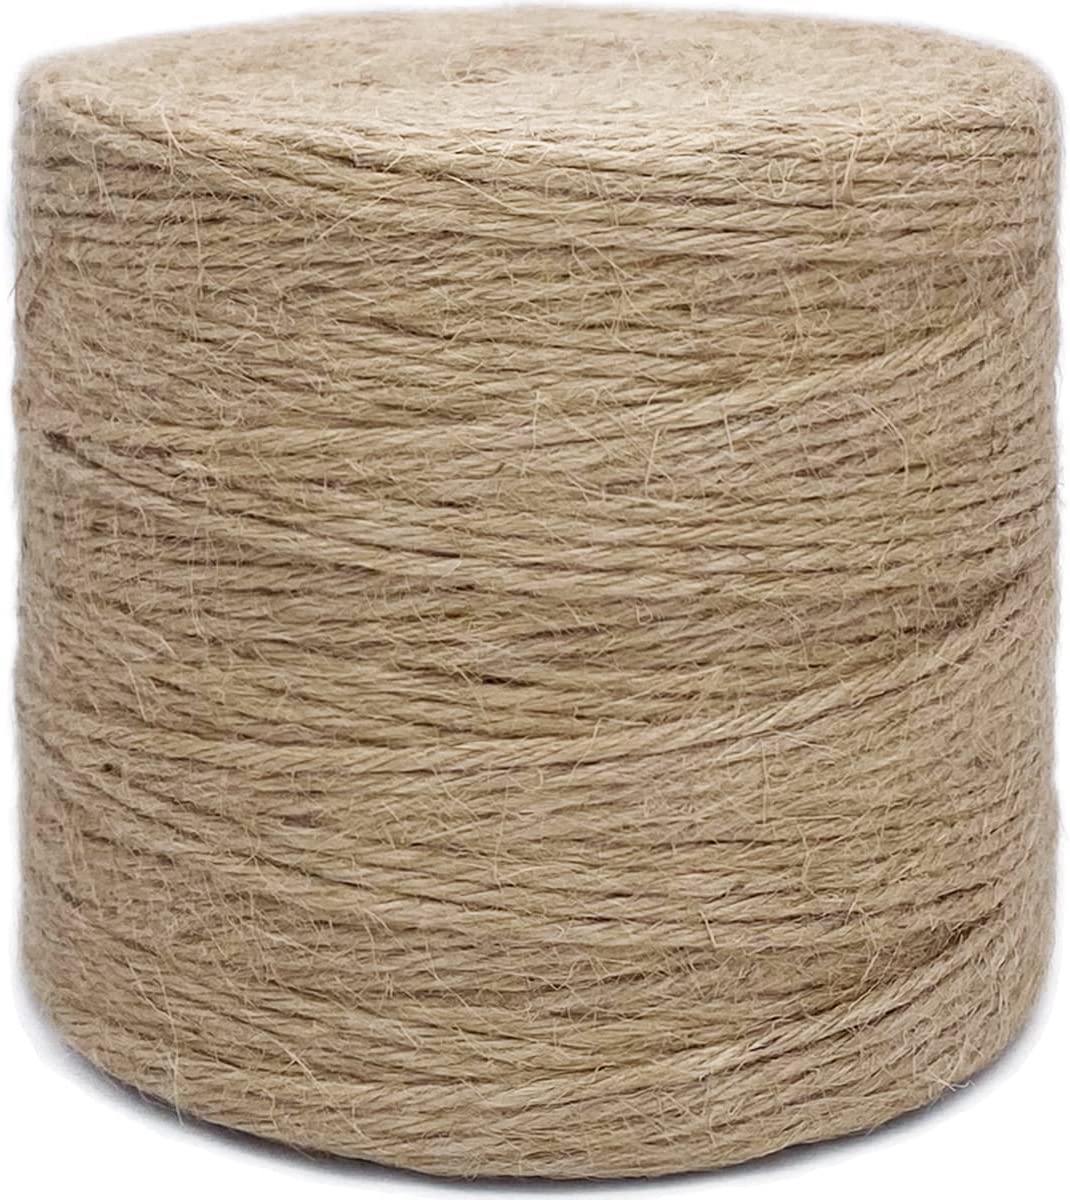  328 Feet Jute Rope 6mm Jute Twine String 4-Ply Natural Thick  Jute Twine 1/4” Heavy Duty Hemp Rope for Cat Scratch Post, DIY Art Craft,  Gardening, Home Decorating, Gift Wrapping 